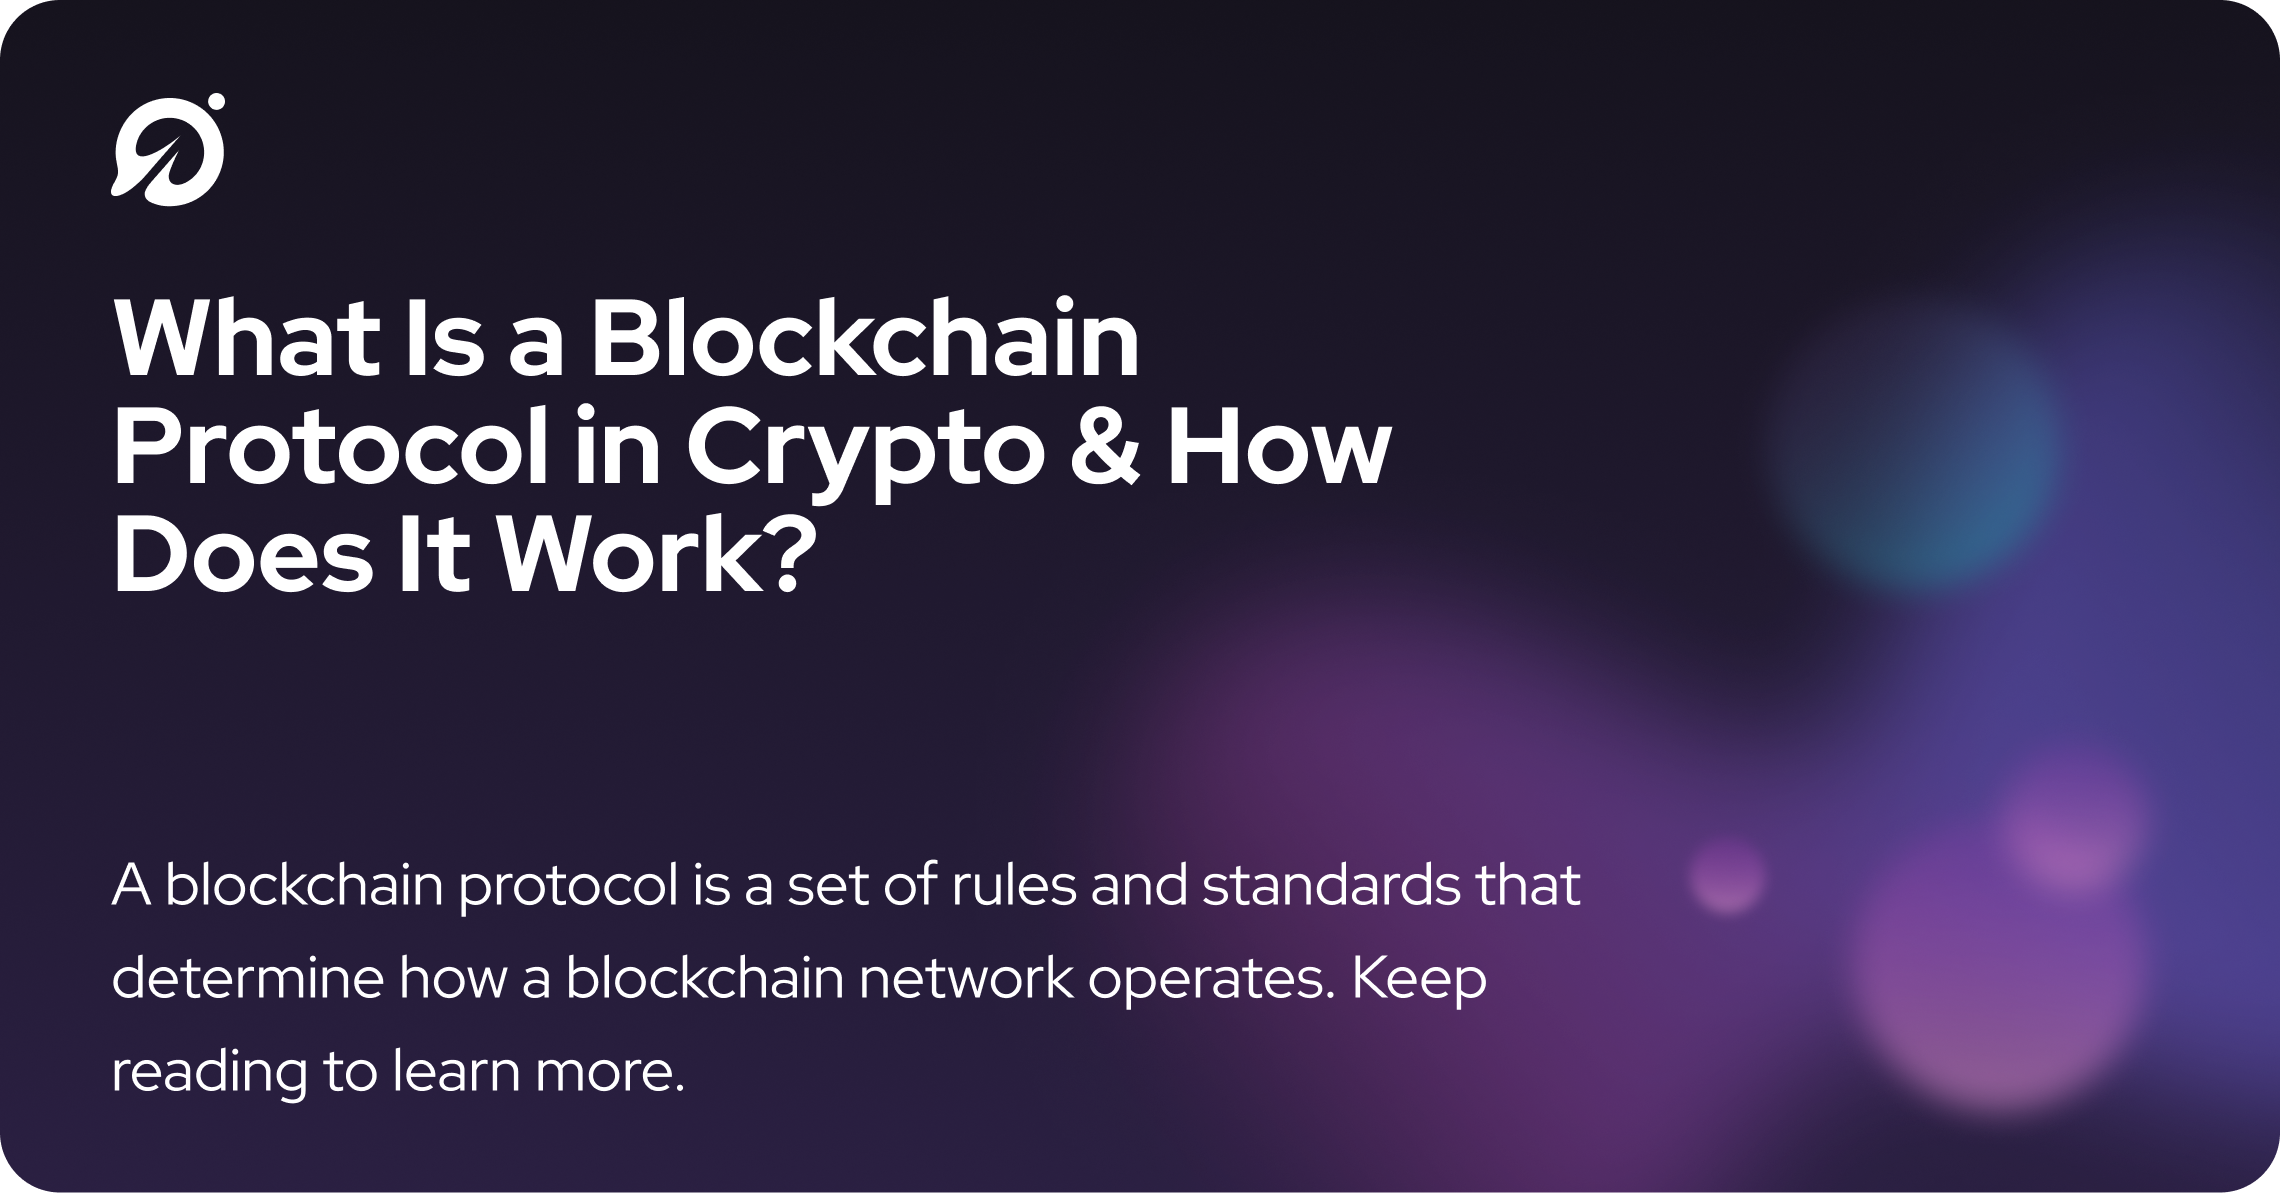 What Is a Blockchain Protocol in Crypto & How Does It Work?